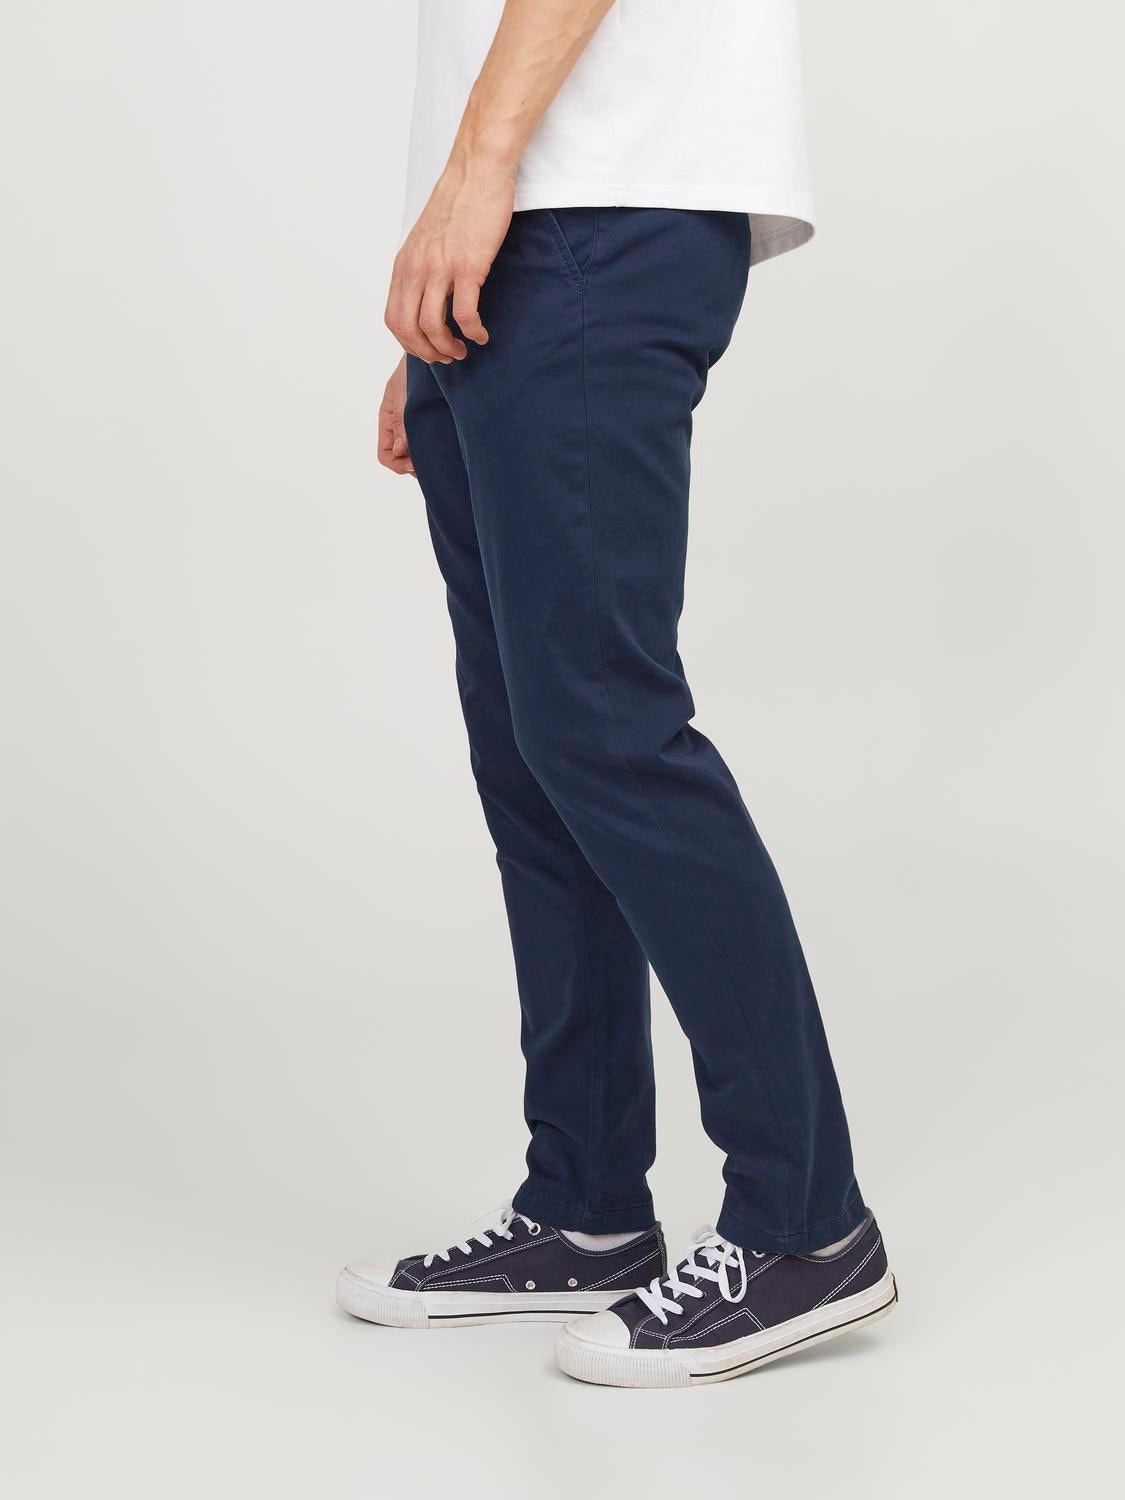 Men's Chinos & Trousers, Cuffed Chinos & Cargo Pants